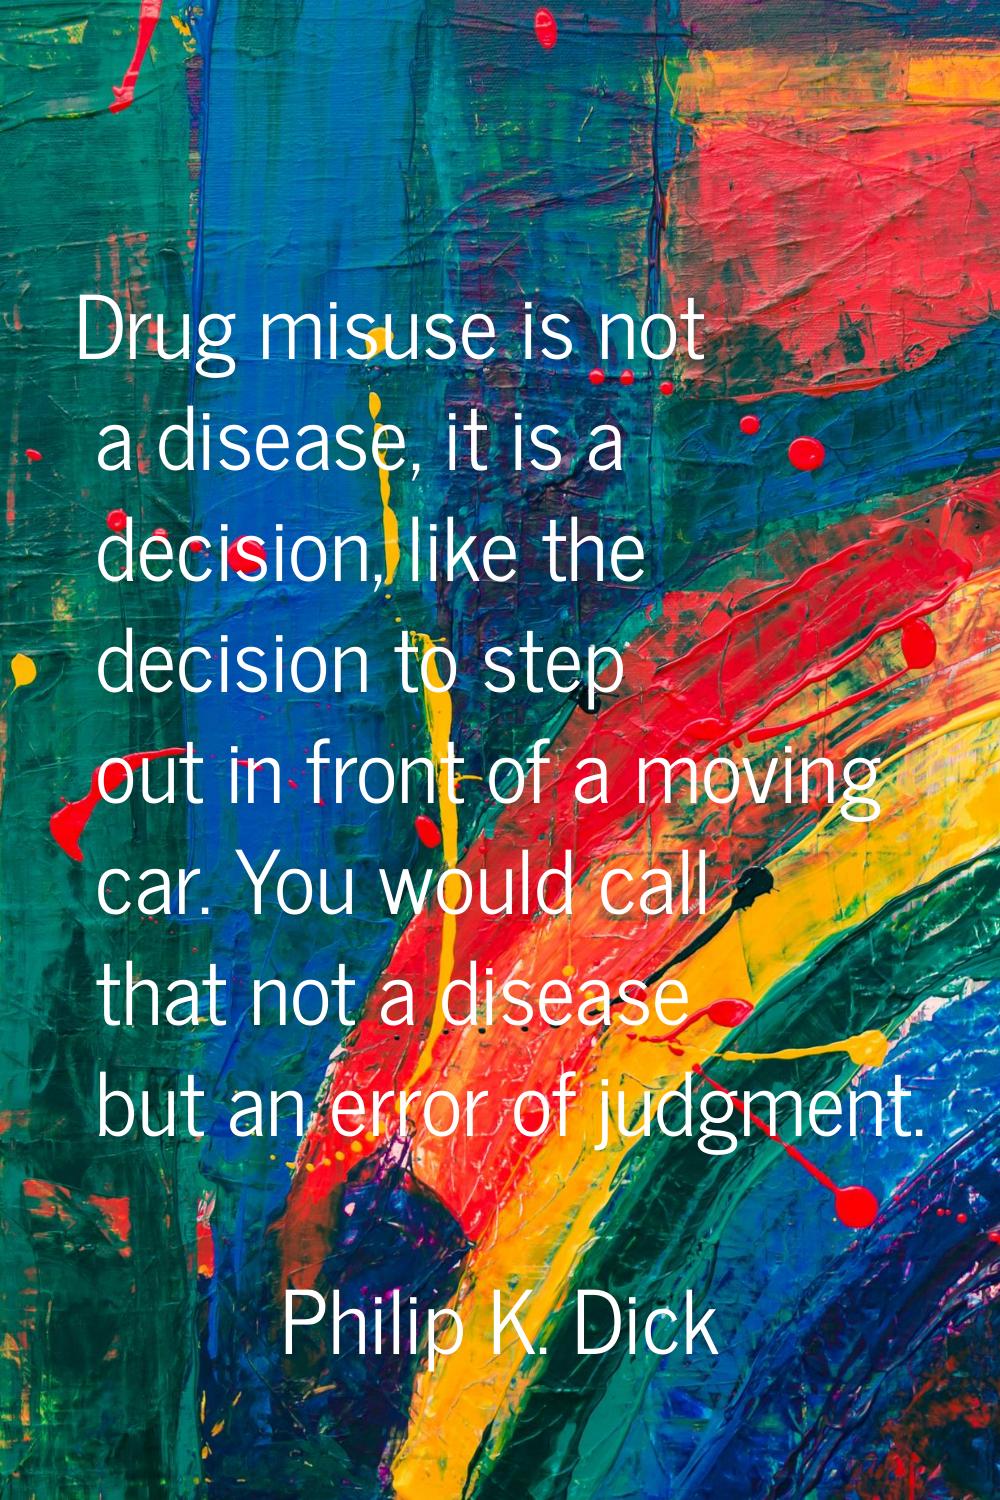 Drug misuse is not a disease, it is a decision, like the decision to step out in front of a moving 